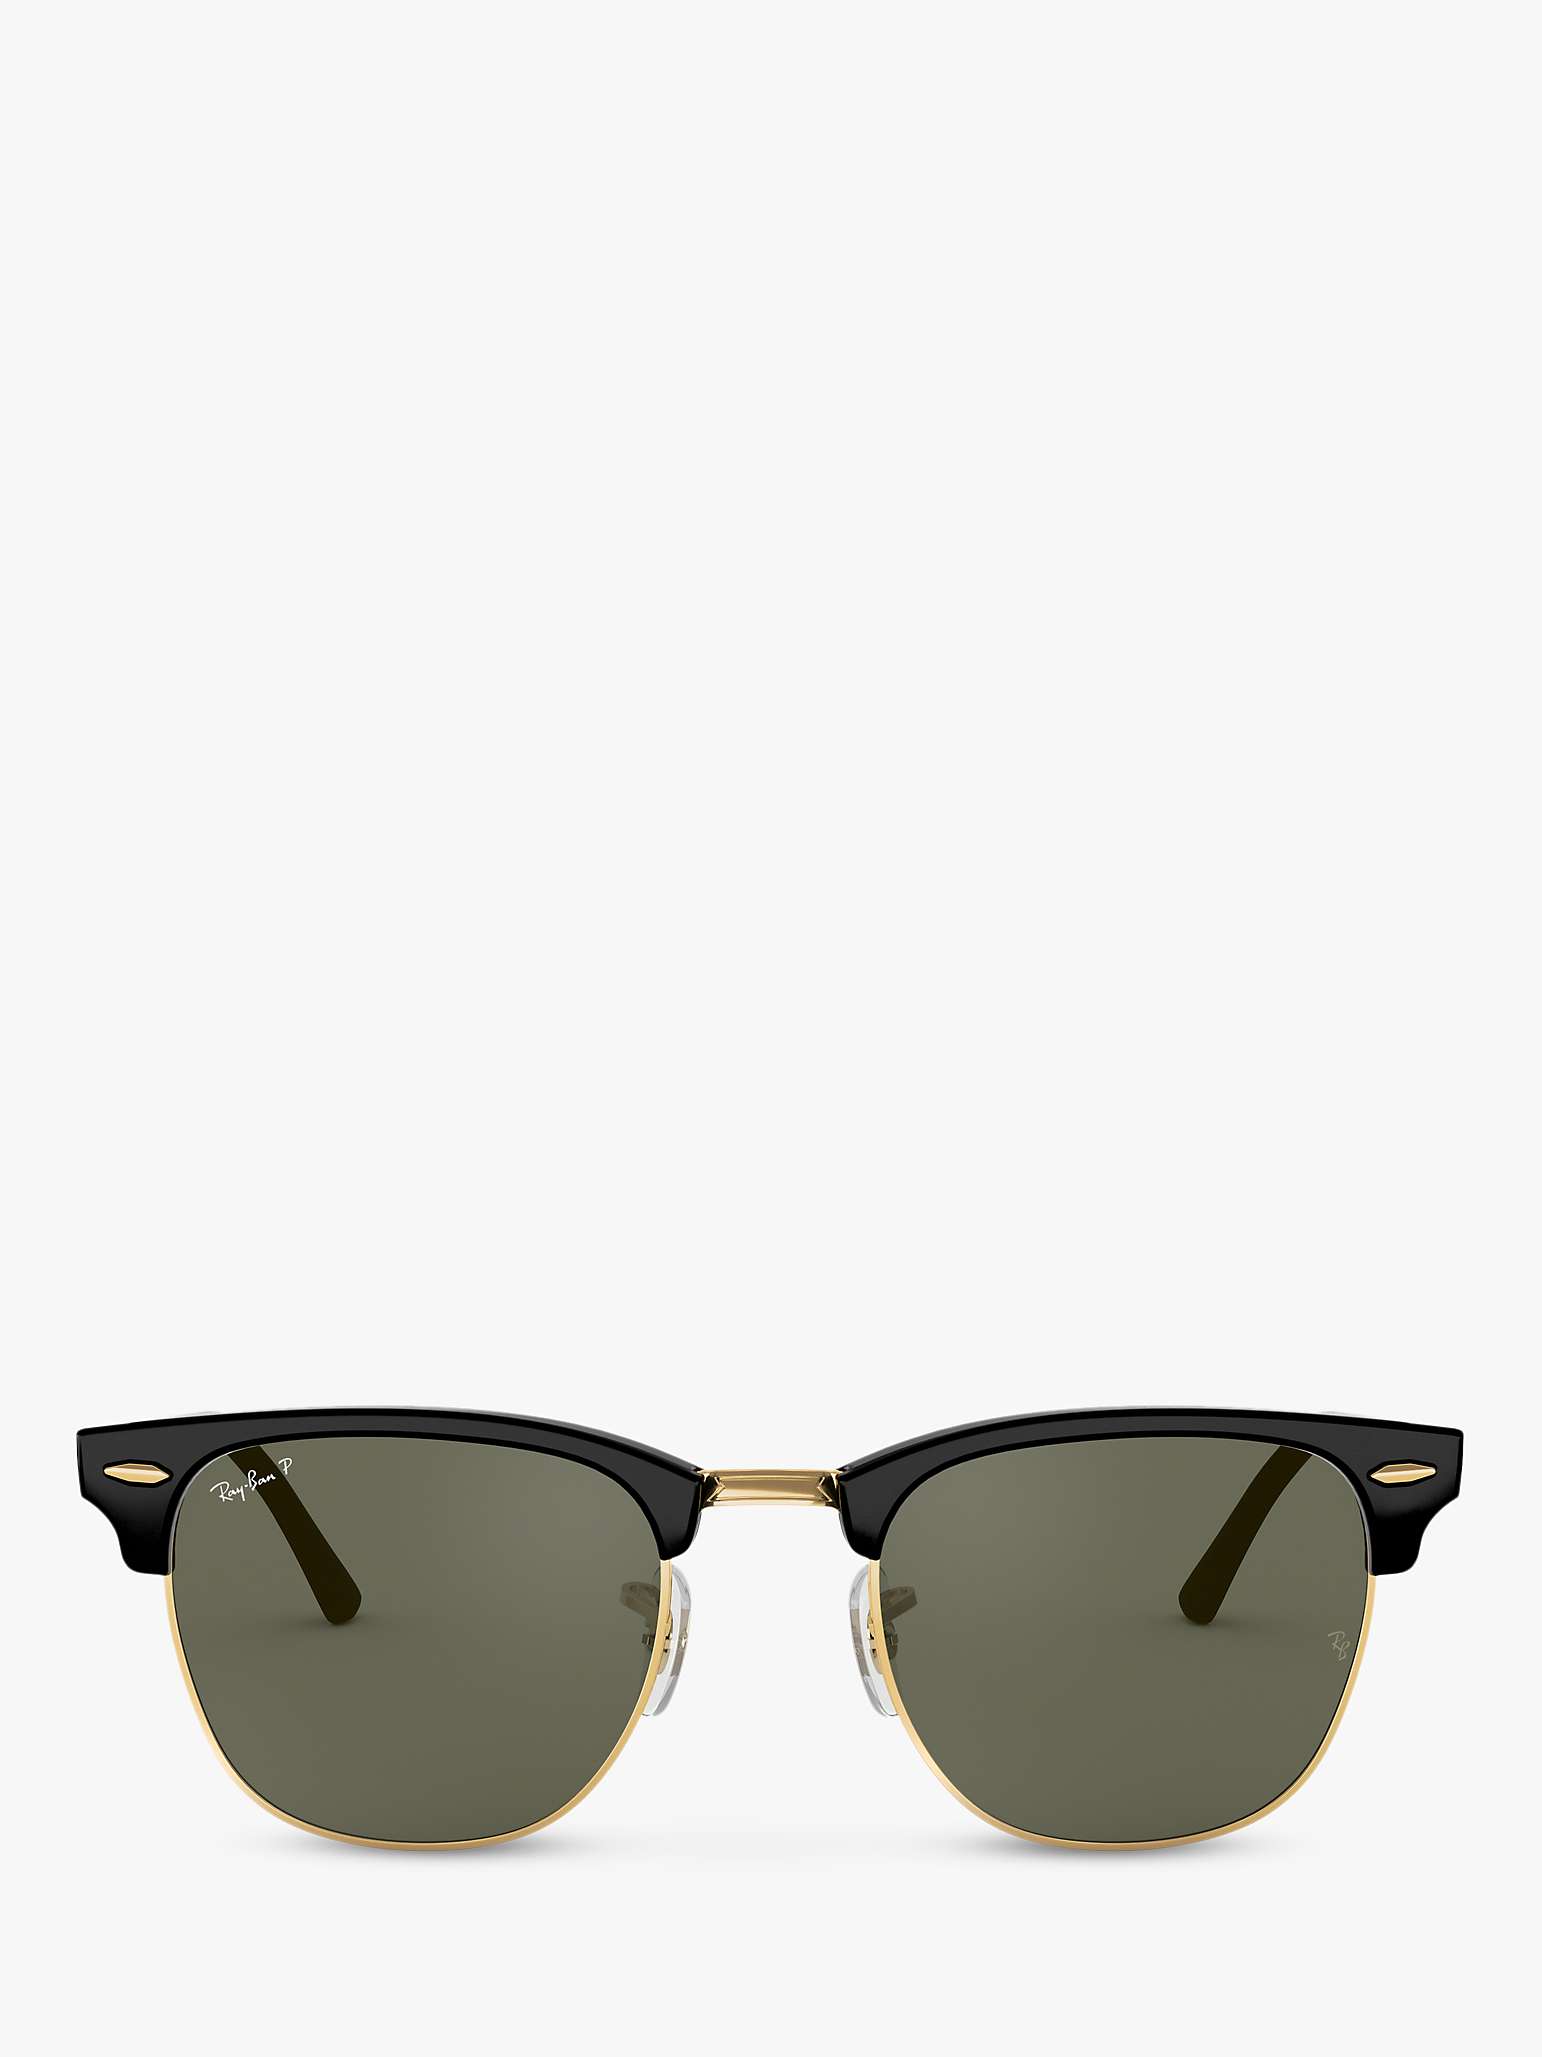 Buy Ray-Ban RB3016 Men's Polarised Clubmaster Sunglasses Online at johnlewis.com